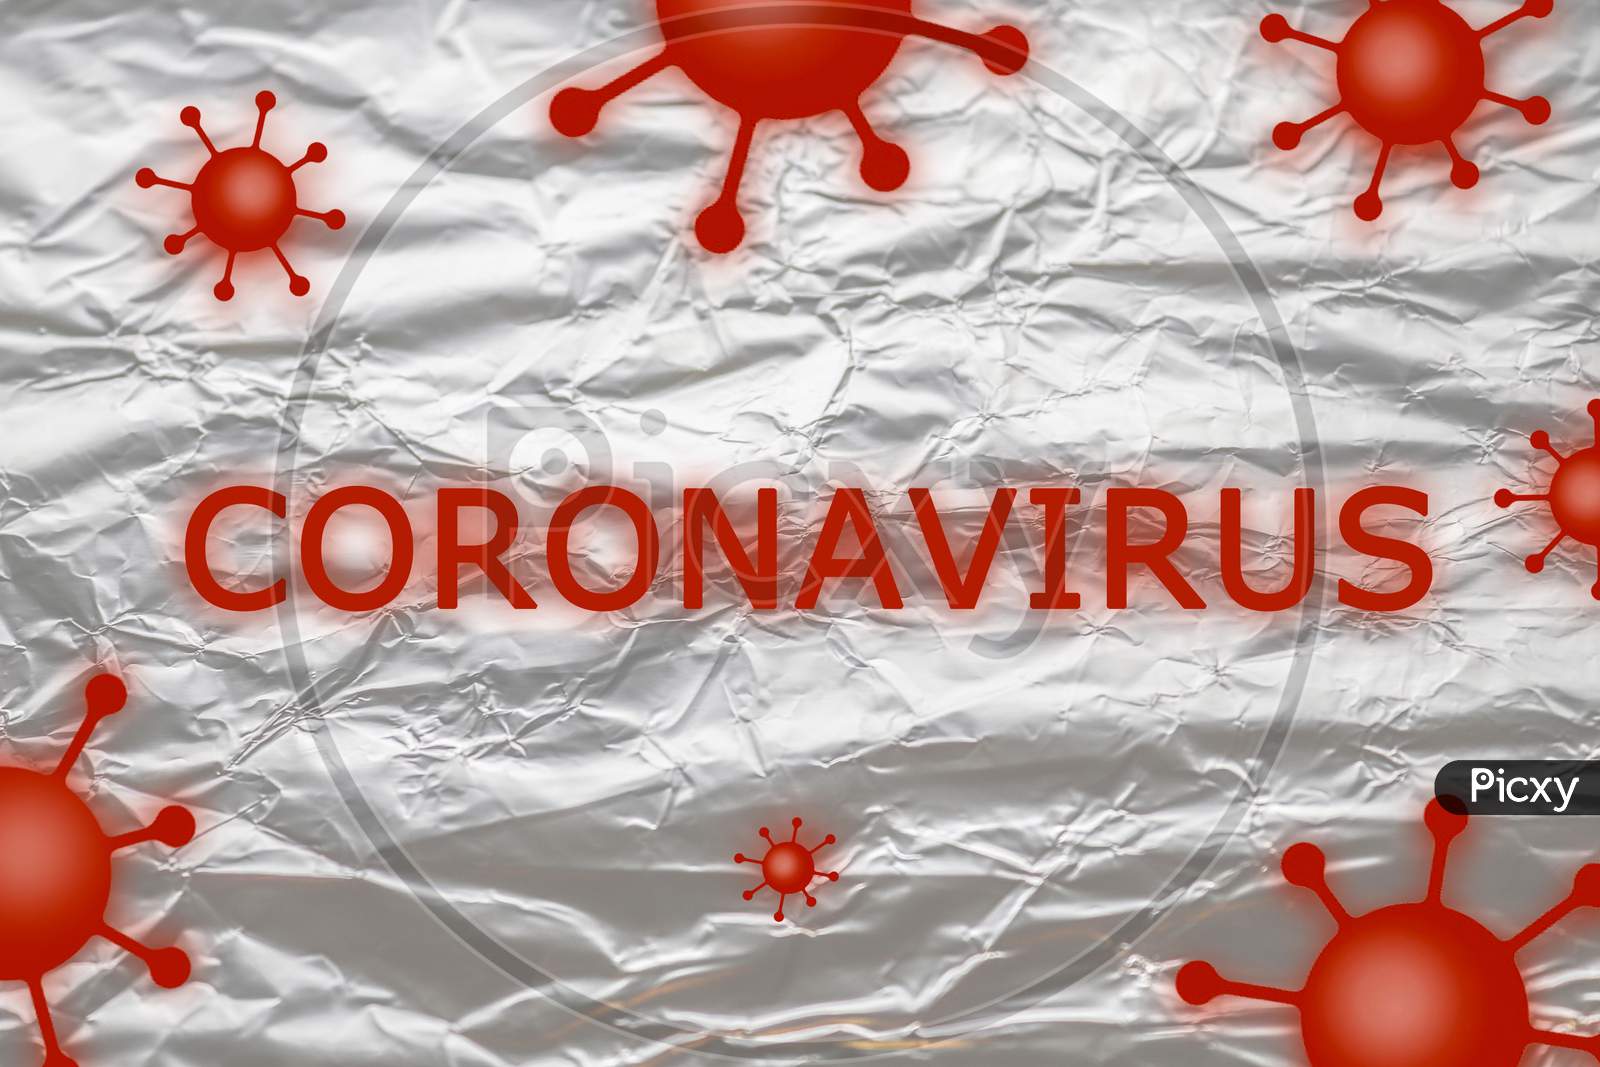 Illustration of COVID-19 and coronavirus texts on a white background